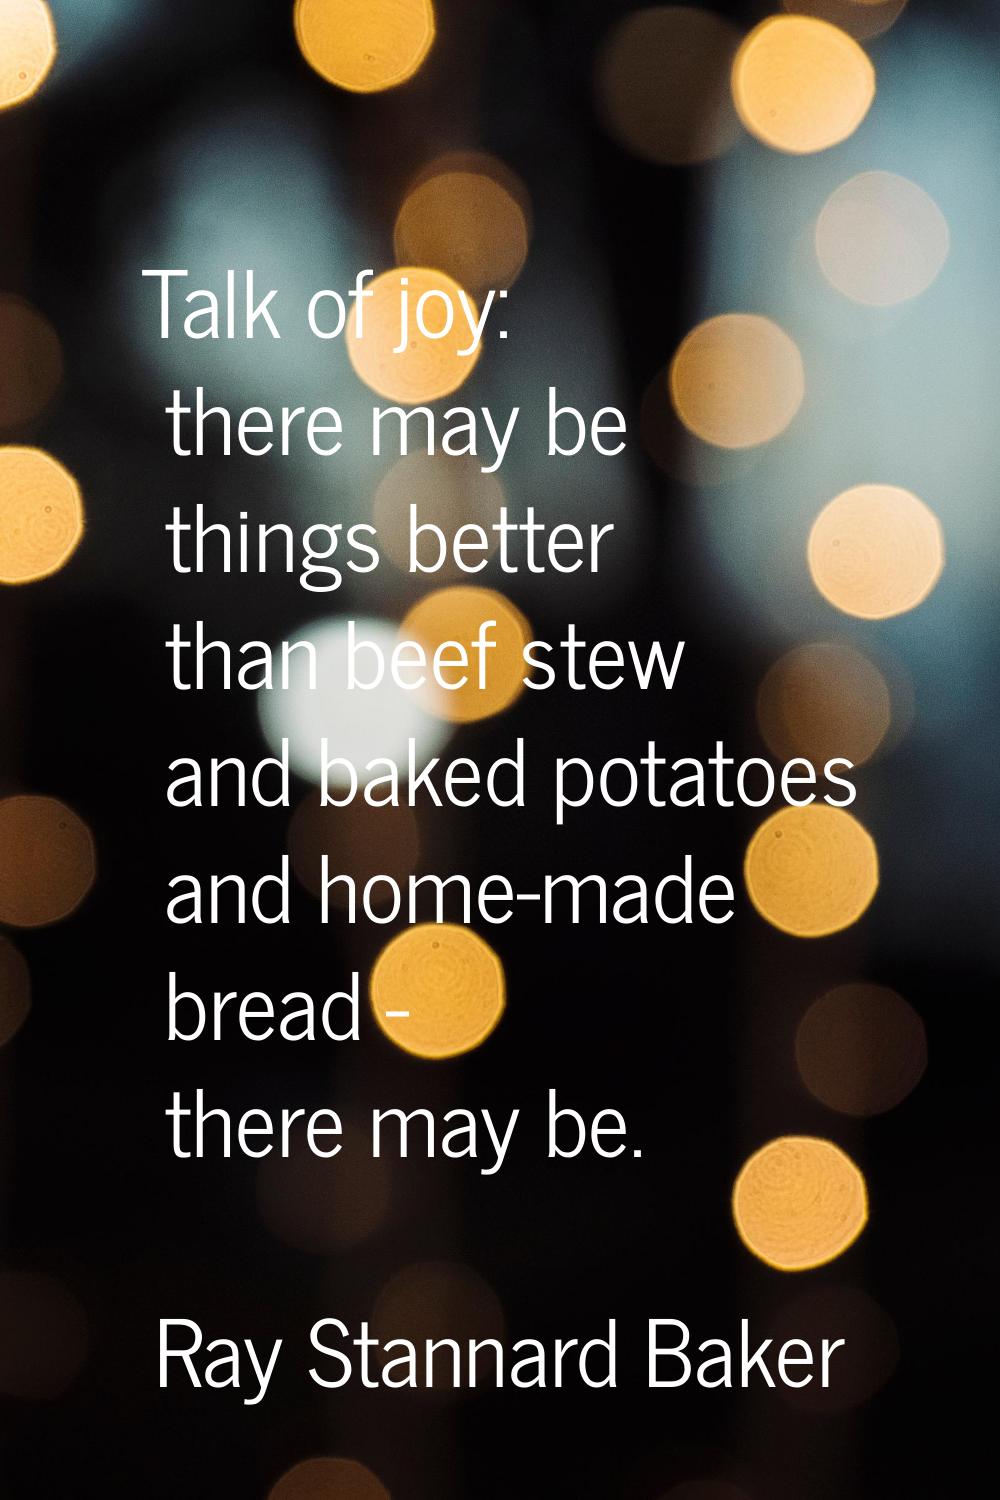 Talk of joy: there may be things better than beef stew and baked potatoes and home-made bread - the